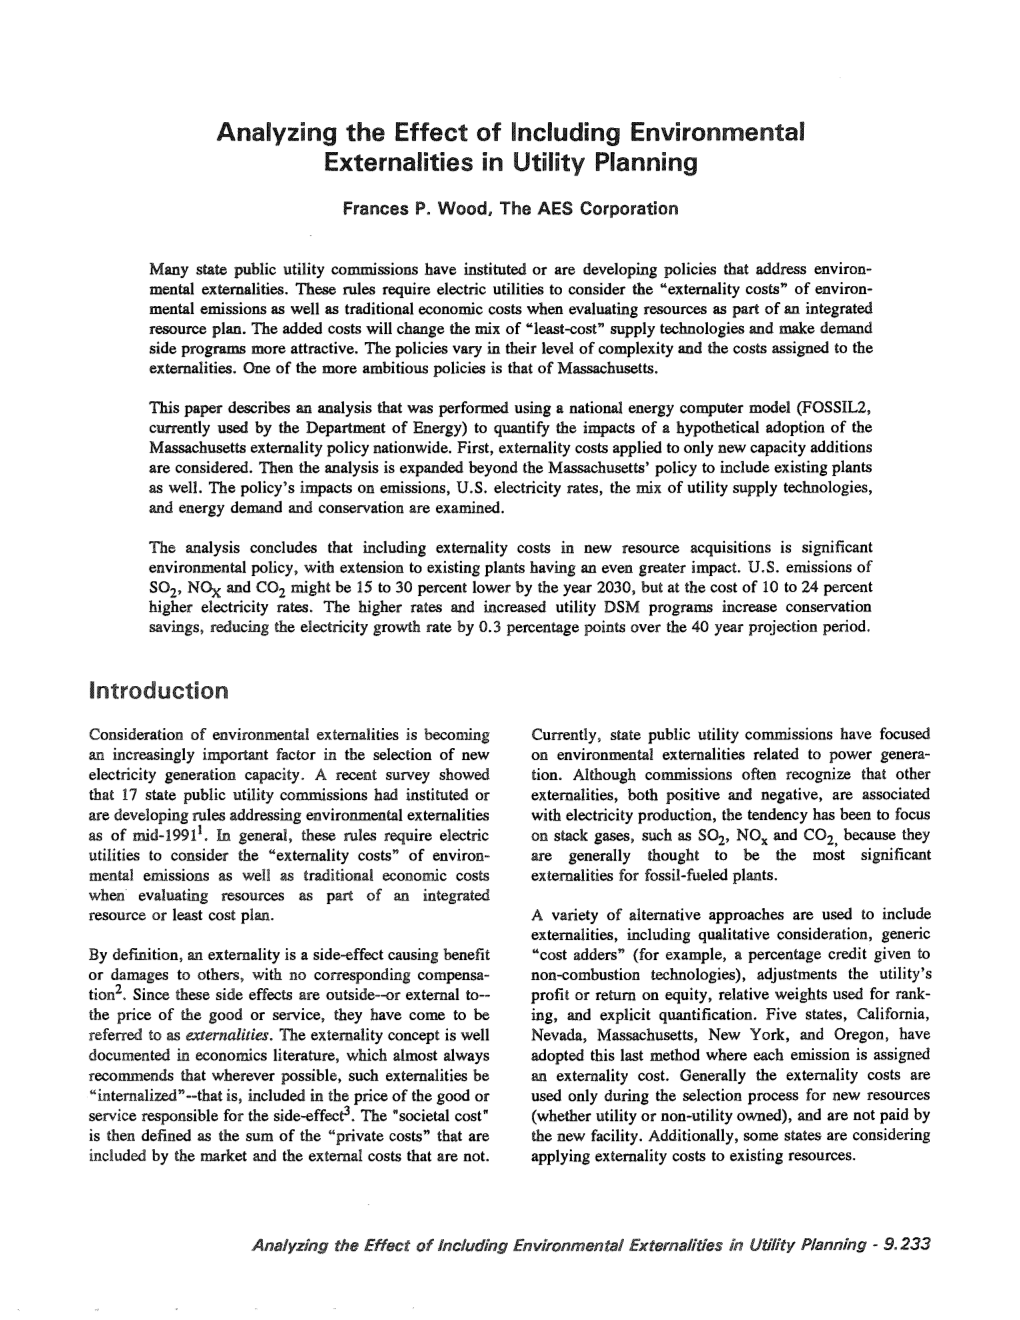 Analyzing the Effect of Including Environmental Externalities in Utility